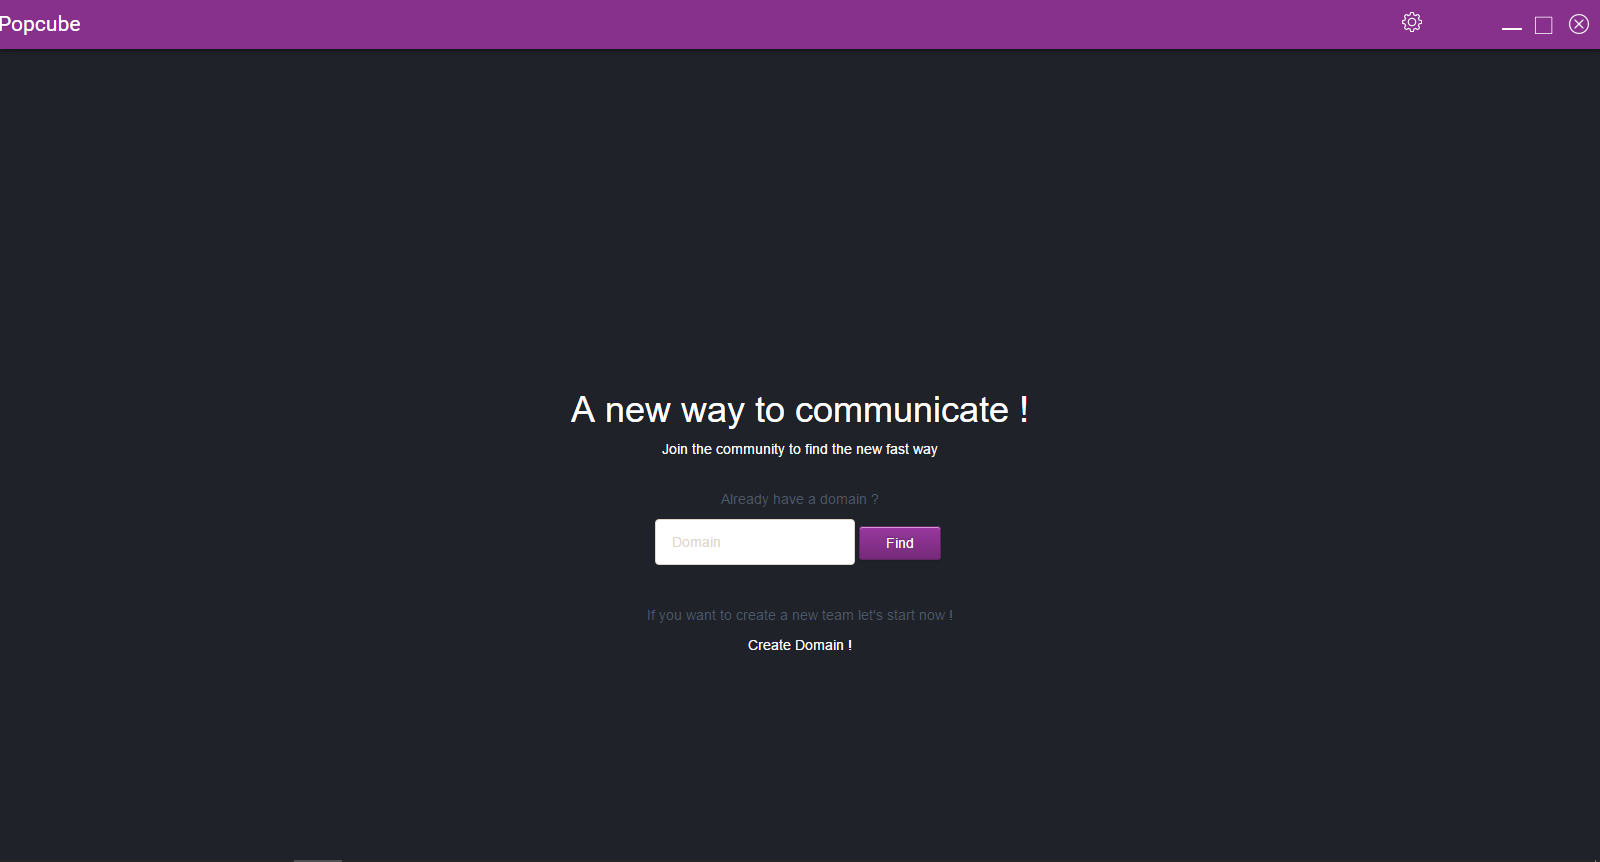 developpement/../../_static/developpement/interface/home.PNG